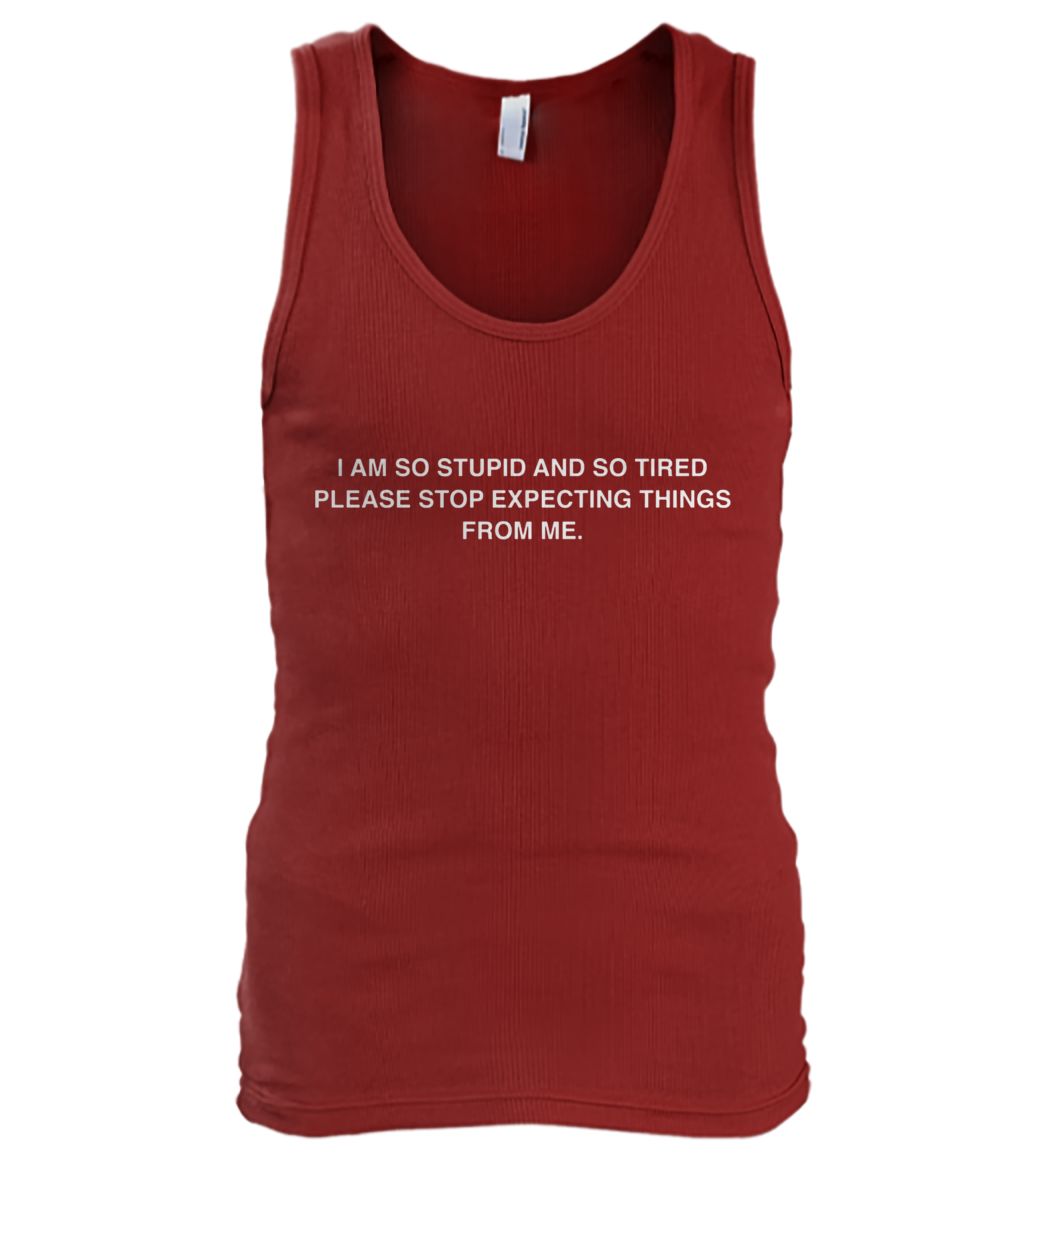 I am so stupid and so tired please stop expecting things from me men's tank top